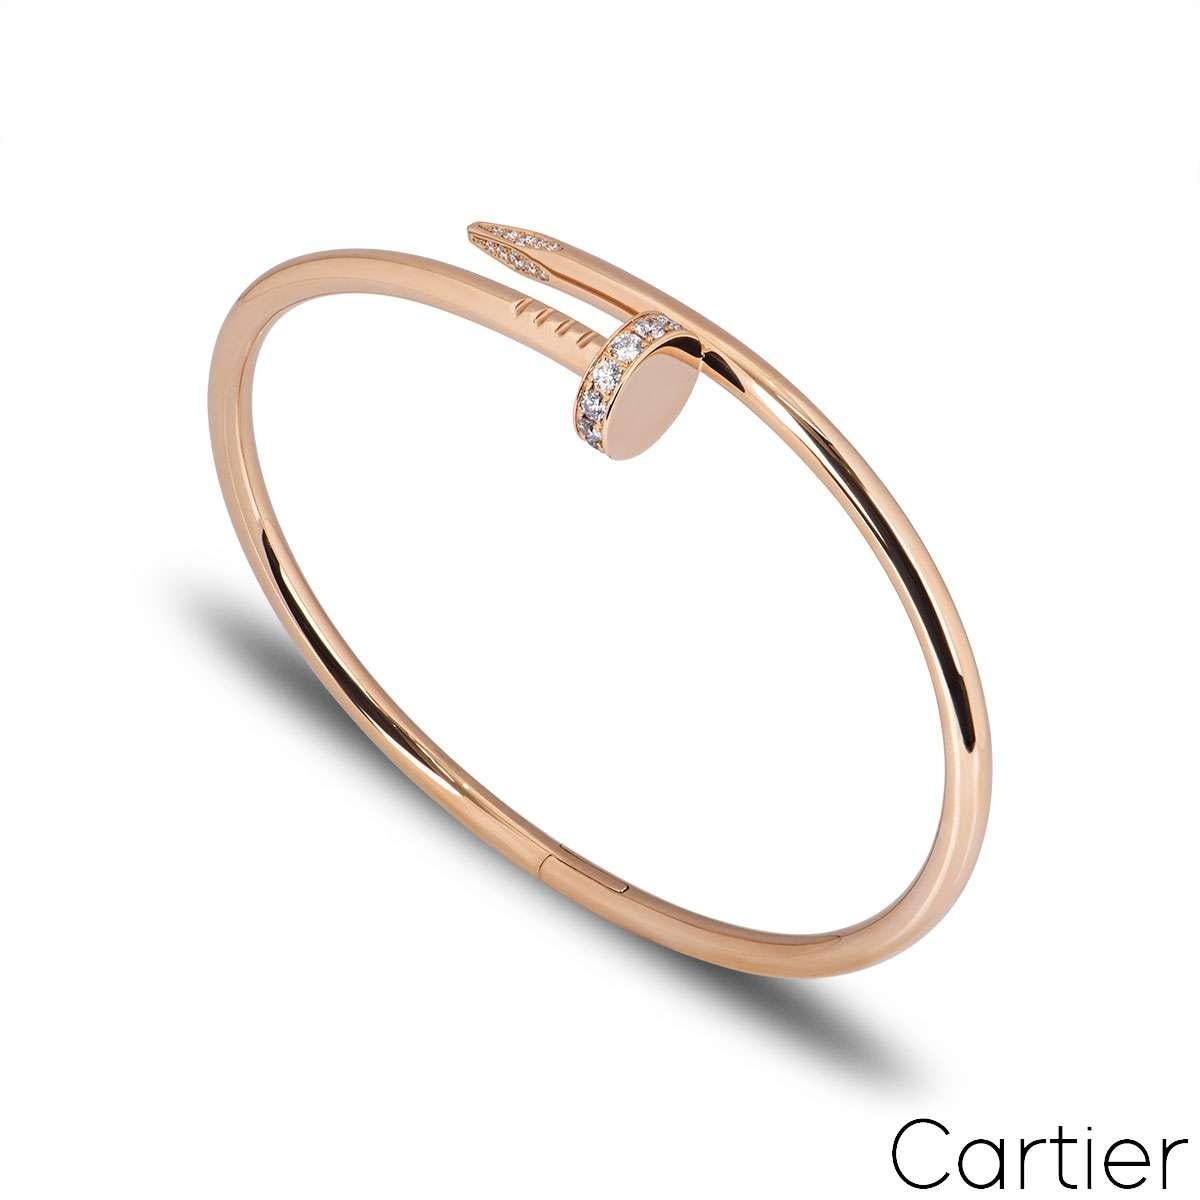 An 18k rose gold, Cartier diamond bracelet from the Juste un Clou collection. The bracelet is in the style of a nail and has 32 round brilliant cut diamonds set in the head and tip totalling 0.58ct and are predominantly F colour and VS clarity. A